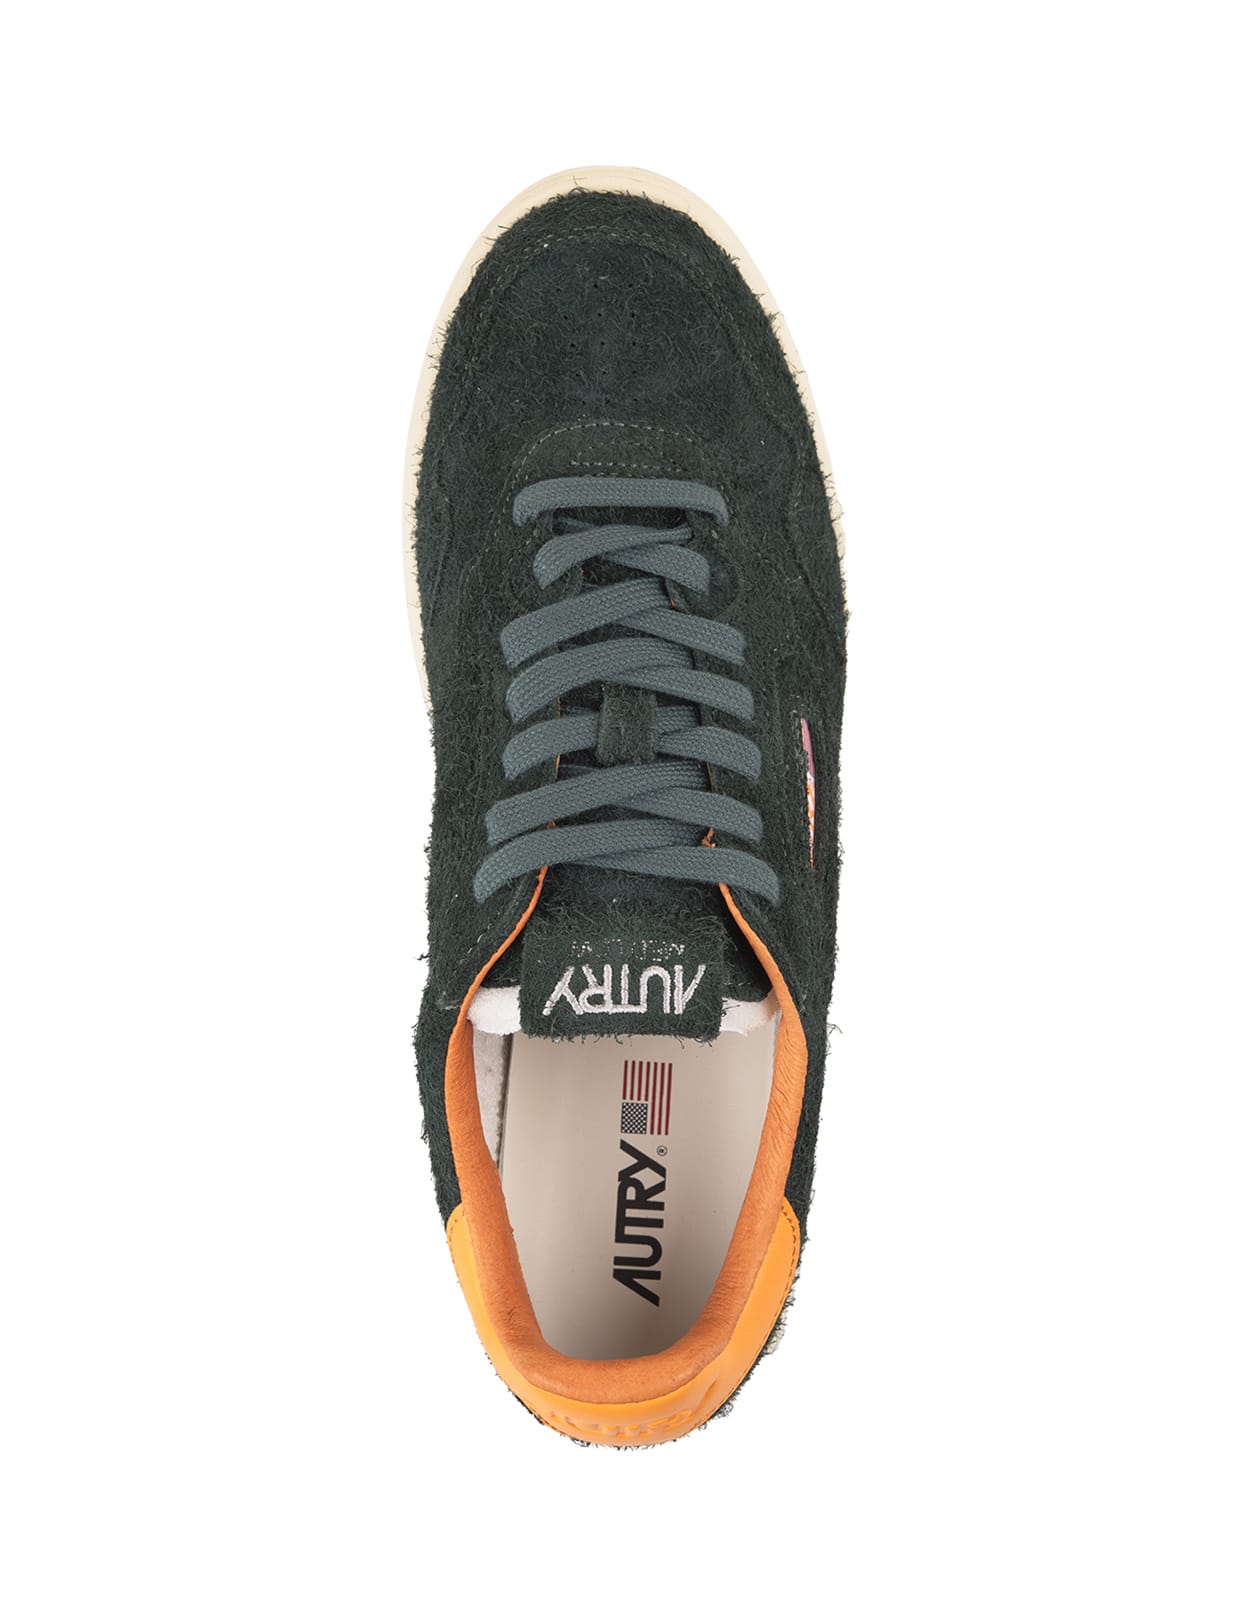 Shop Autry Medalist Flat Sneakers In Green And Glory Suede